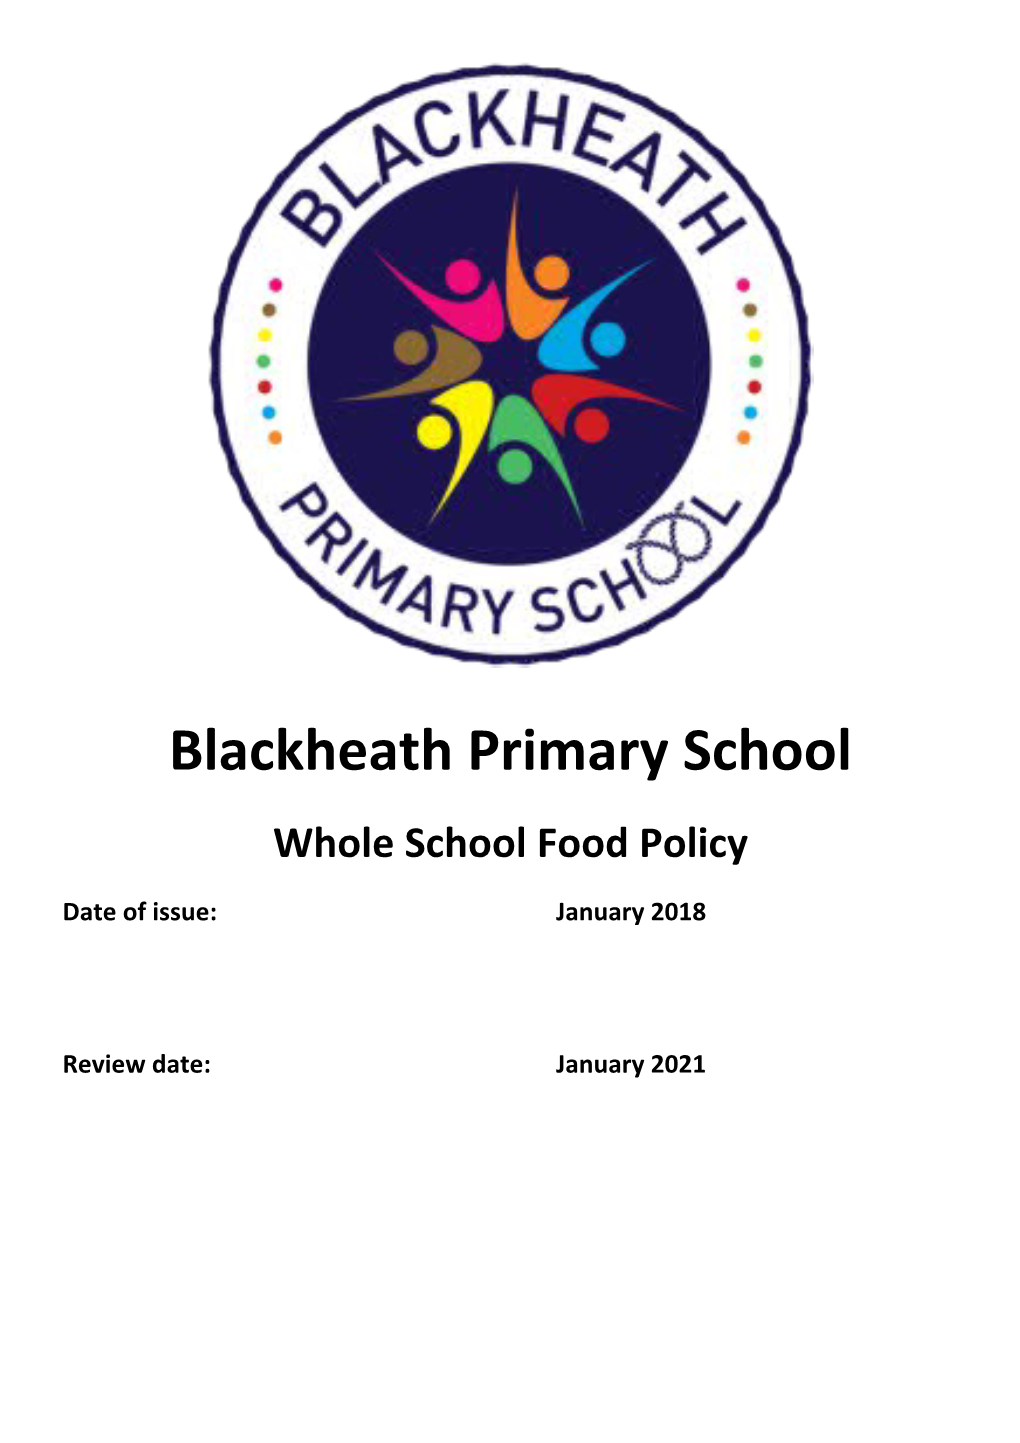 Whole School Food Policy